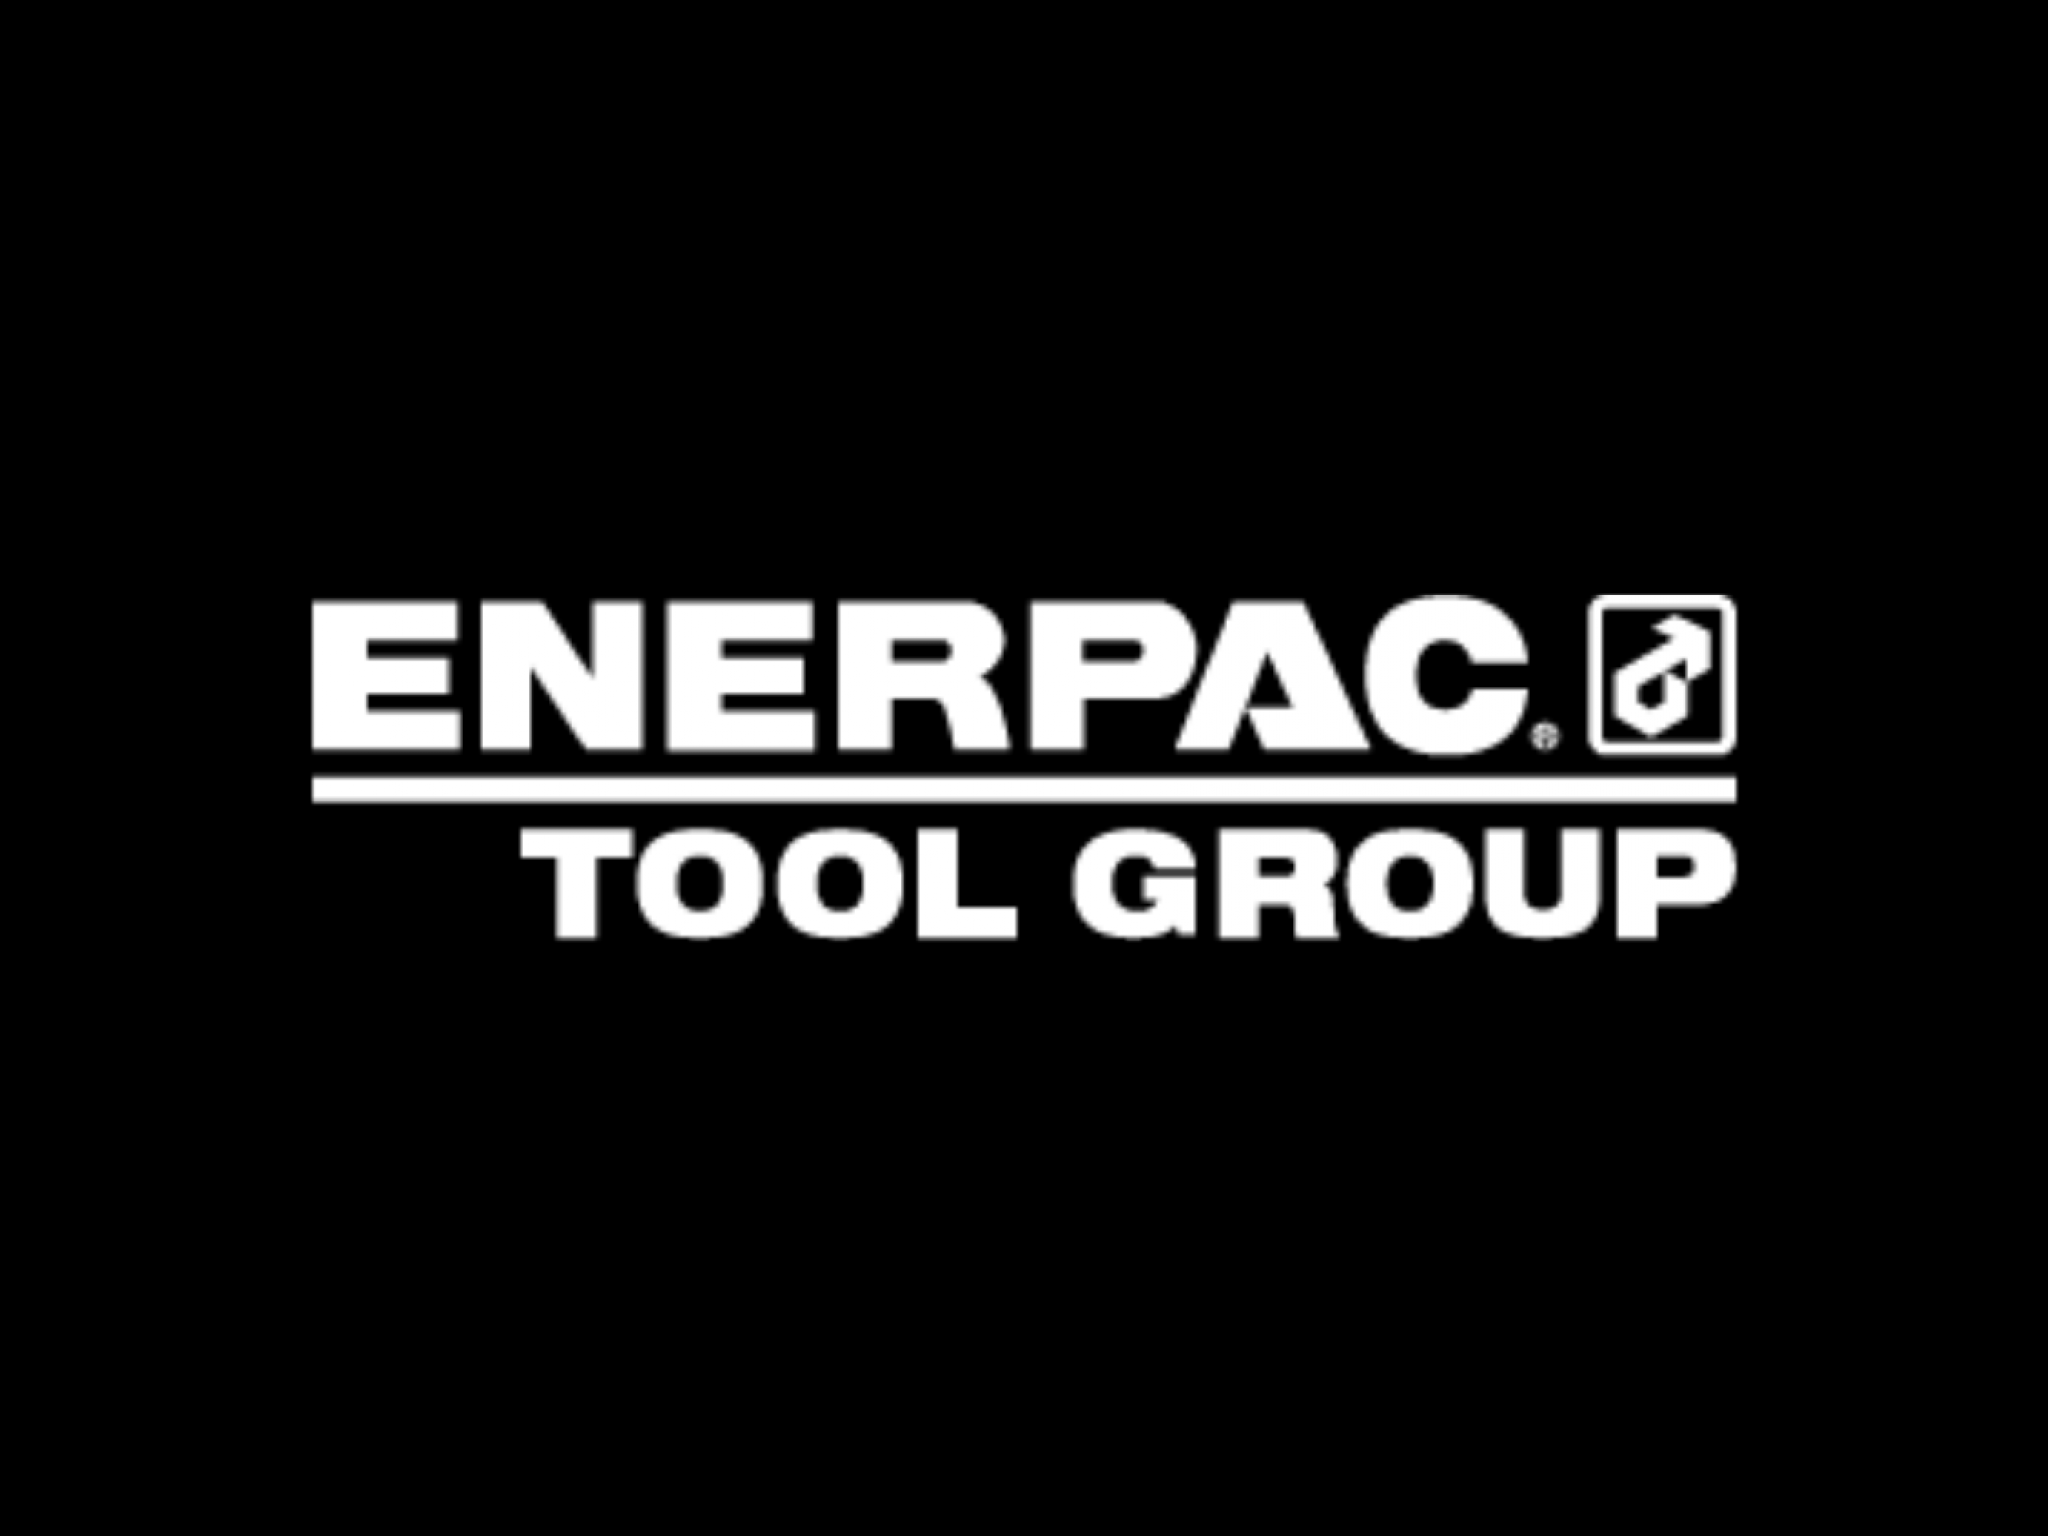  why-enerpac-tool-group-shares-are-trading-higher-today 